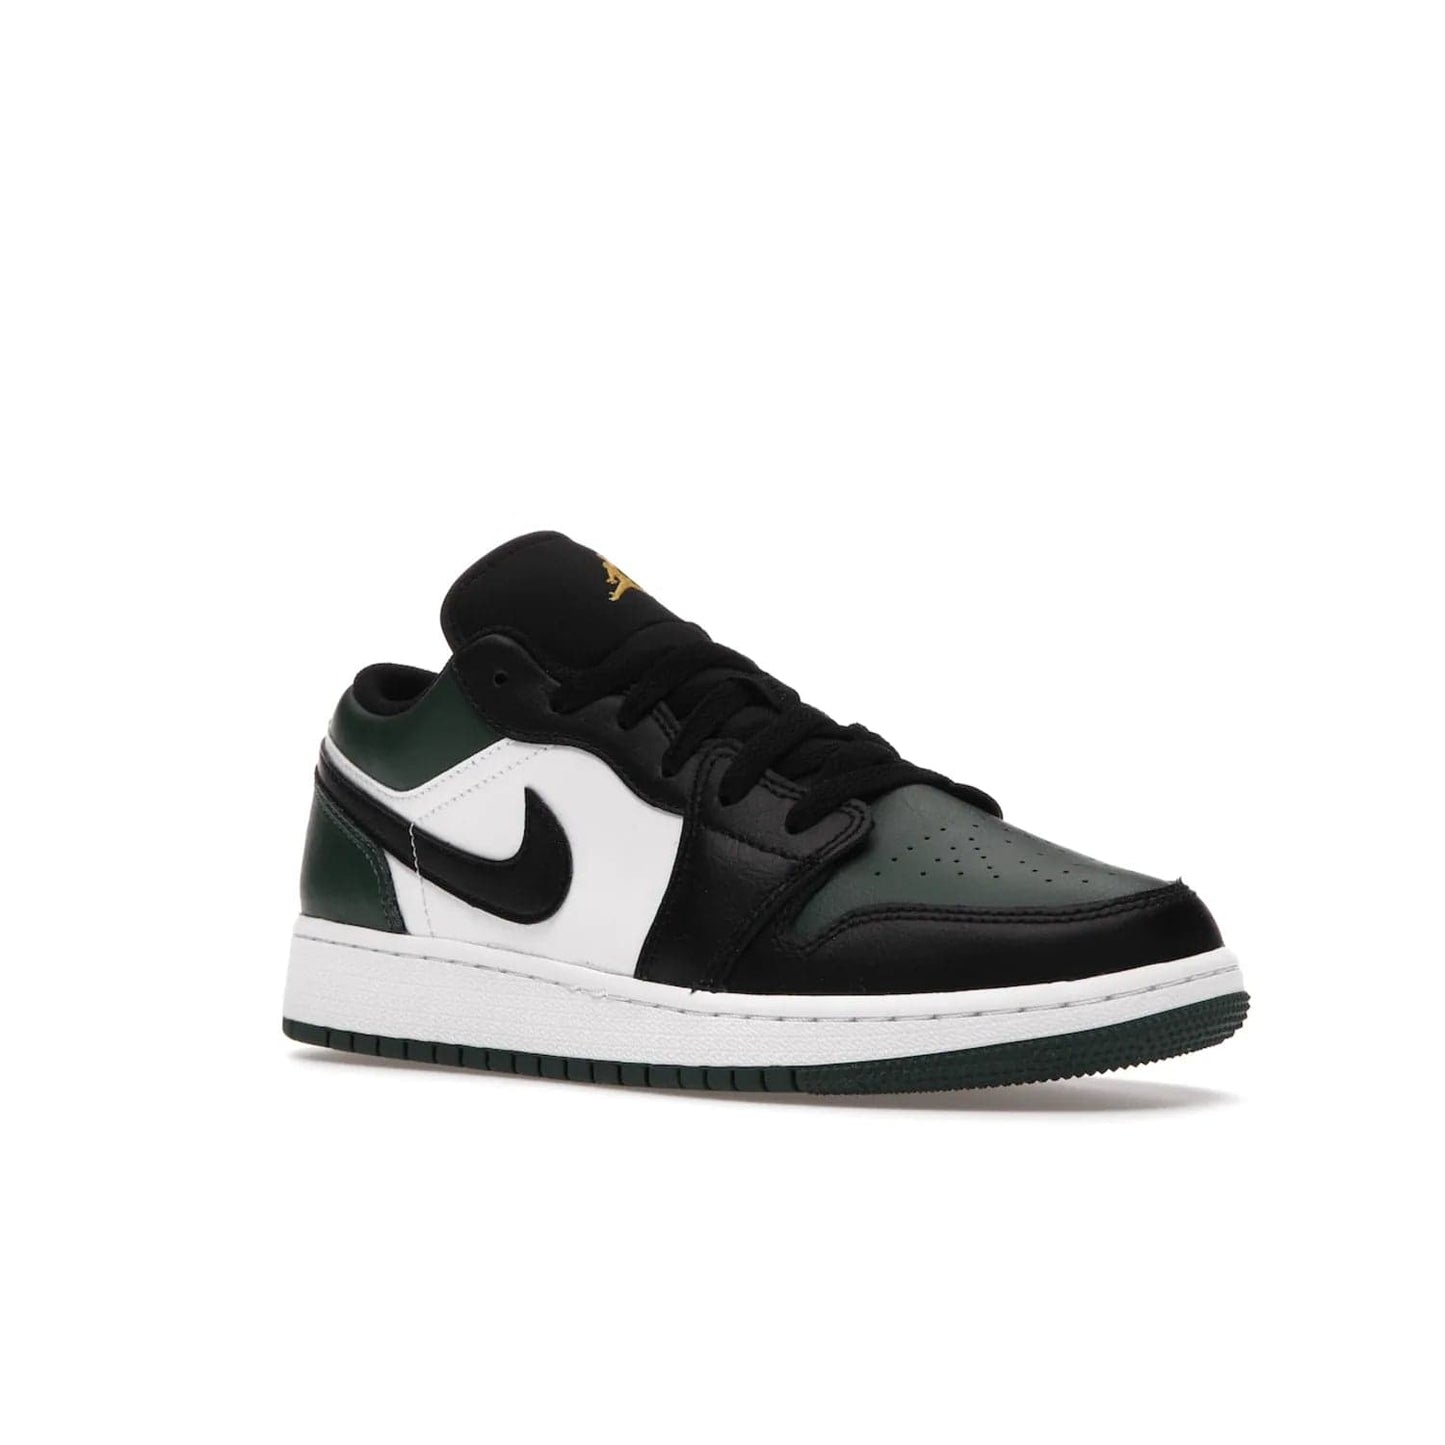 Jordan 1 Low Green Toe (GS) - Image 5 - Only at www.BallersClubKickz.com - Get the perfect low cut Jordans. Shop the Air Jordan 1 Low Noble Green GS shoes with its unique colorway and stencil Jumpman logo. Available October 2021.